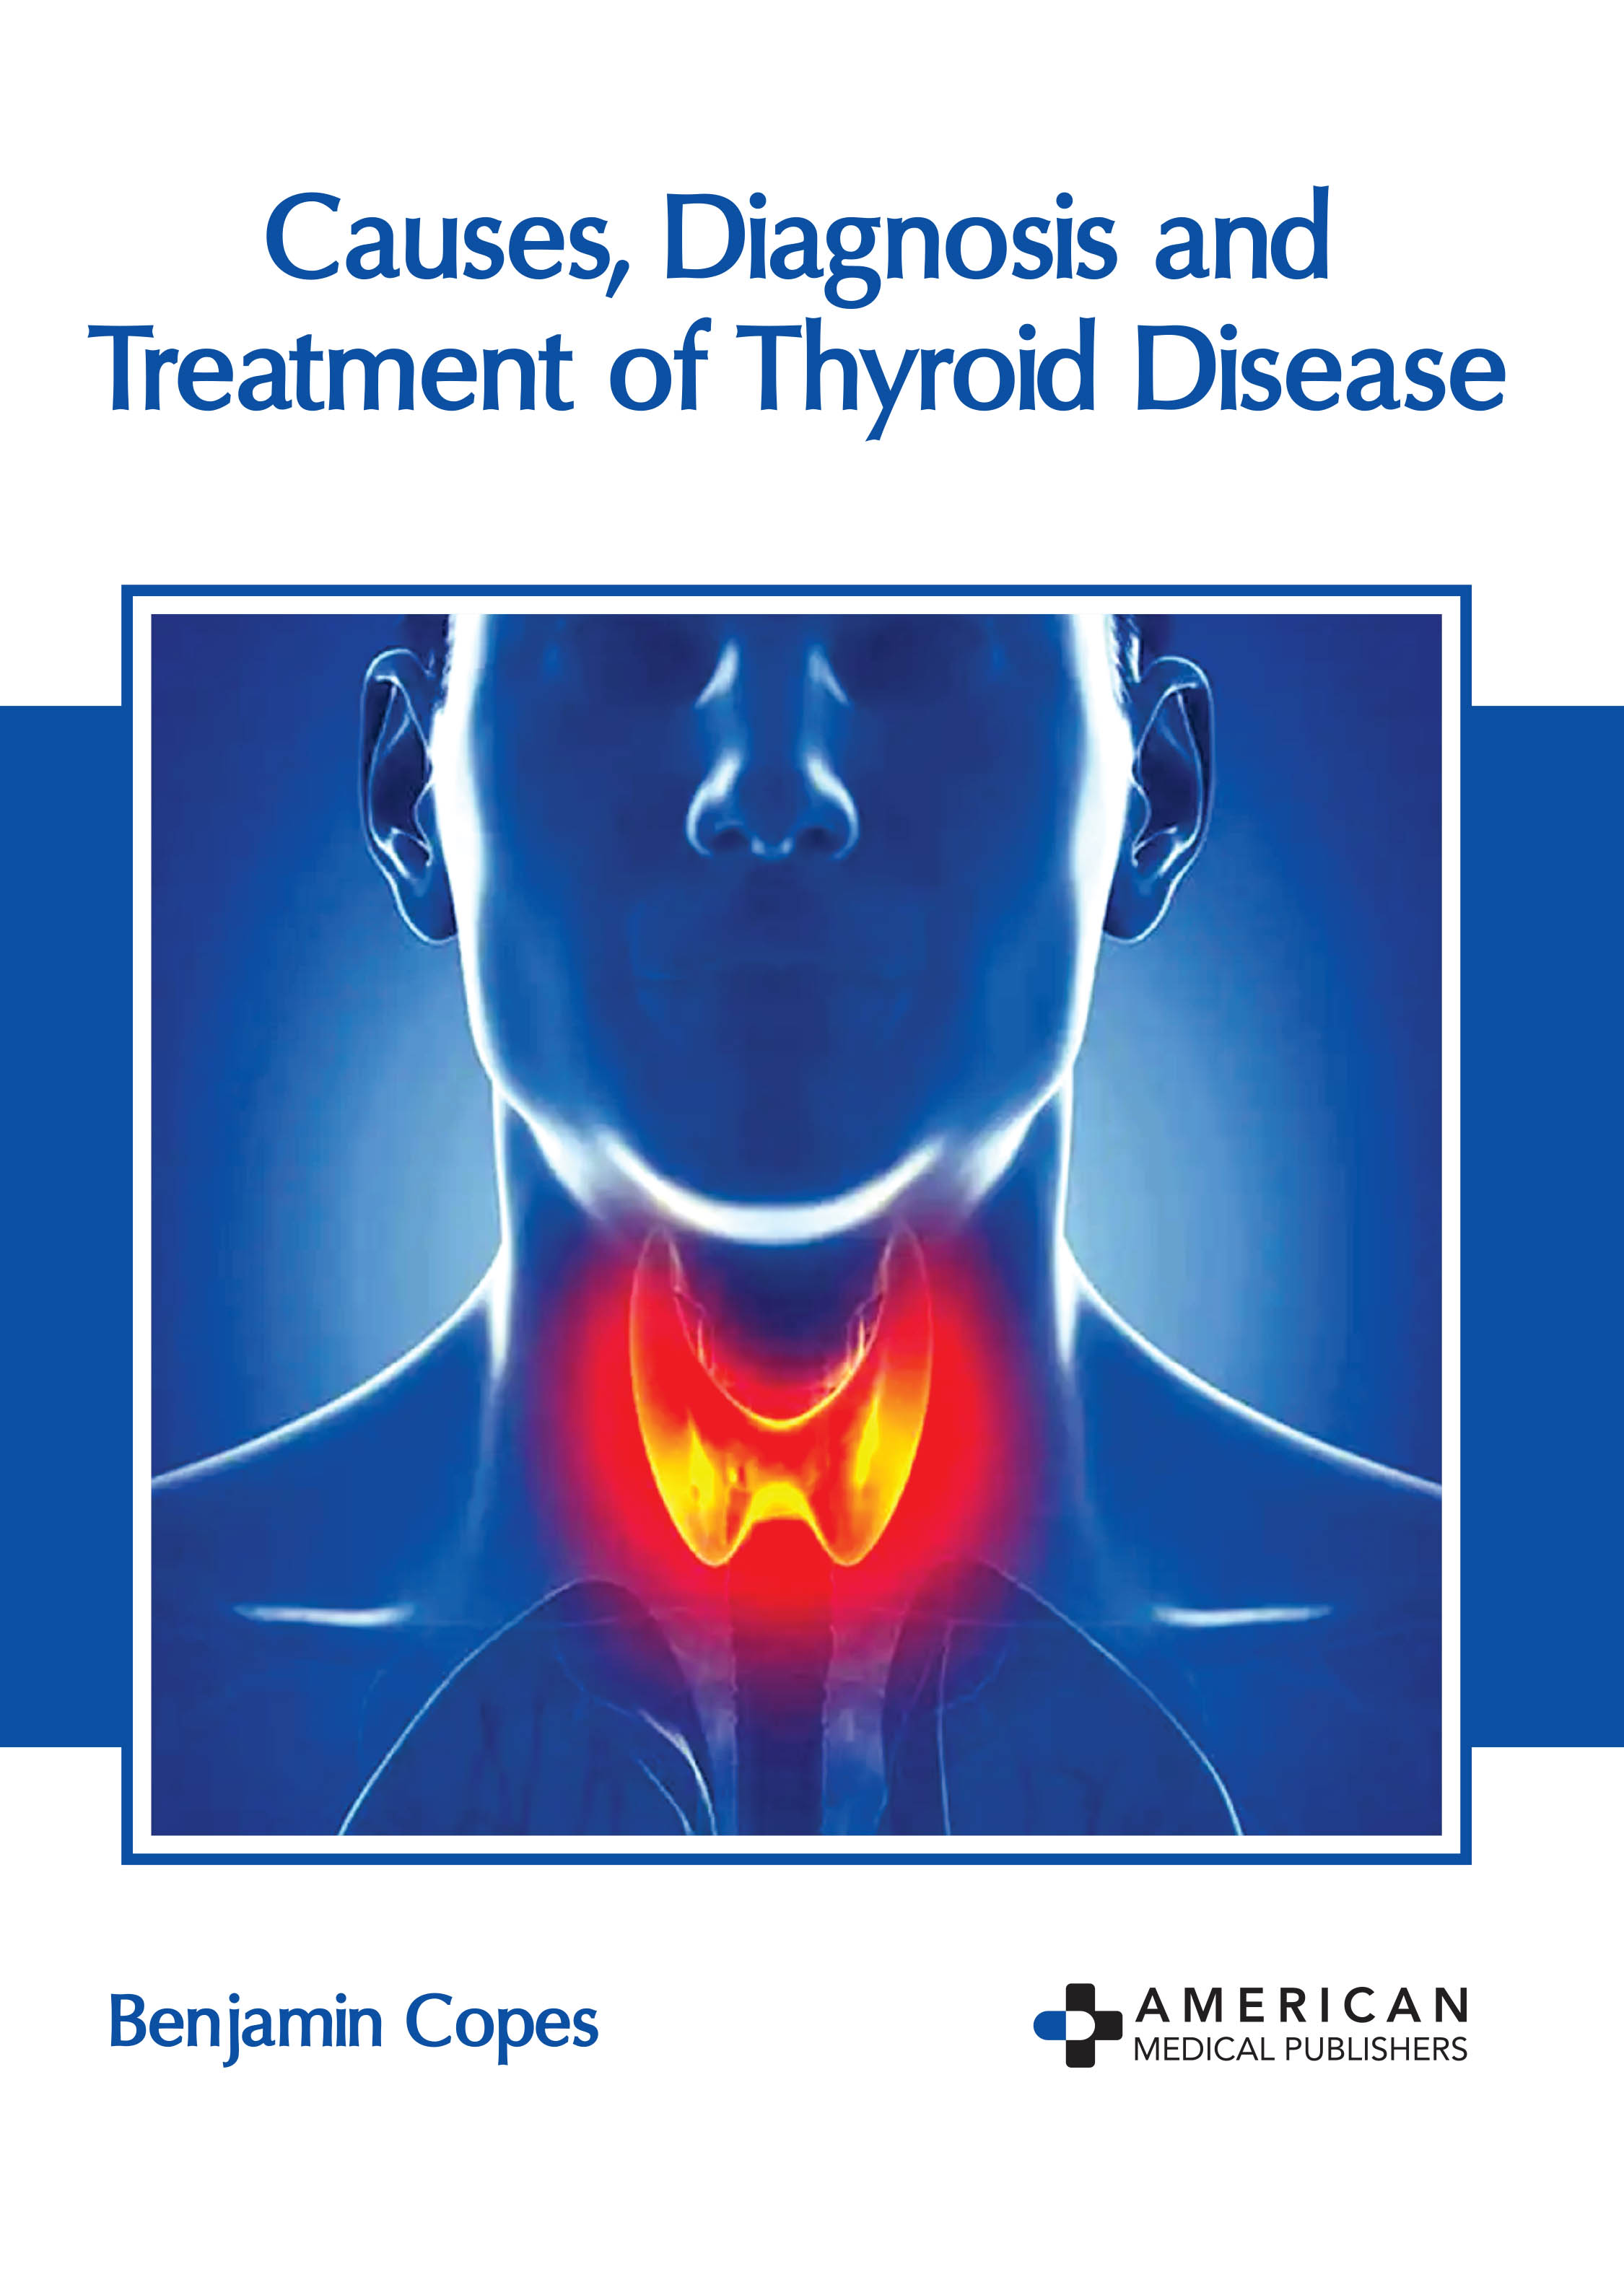 CAUSES, DIAGNOSIS AND TREATMENT OF THYROID DISEASE